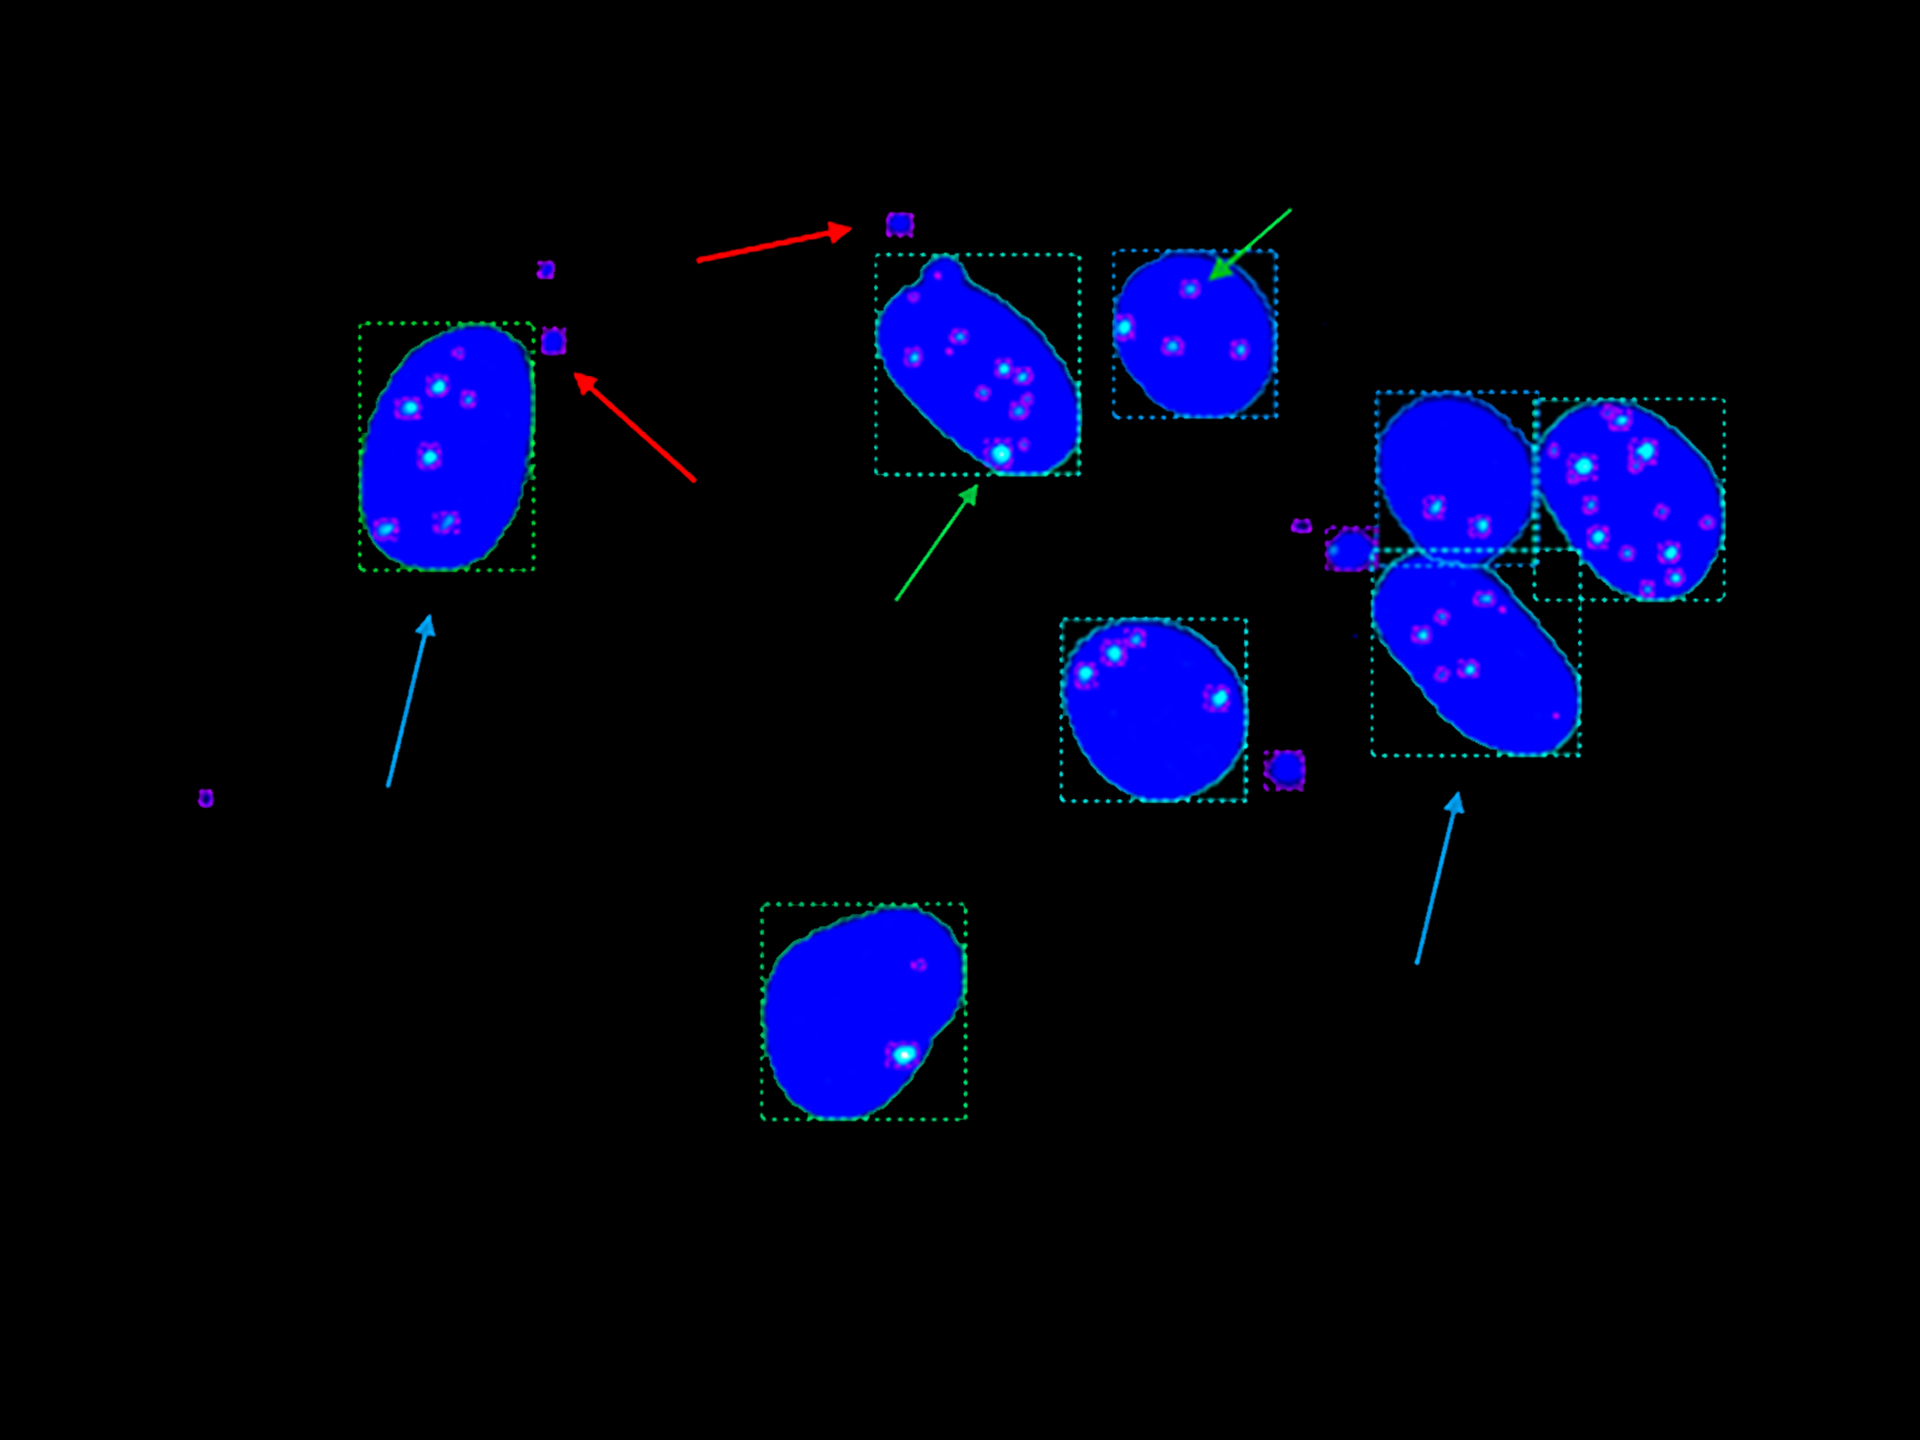 Figure 2A: Representative clip of data set with identified objects as bounding boxes